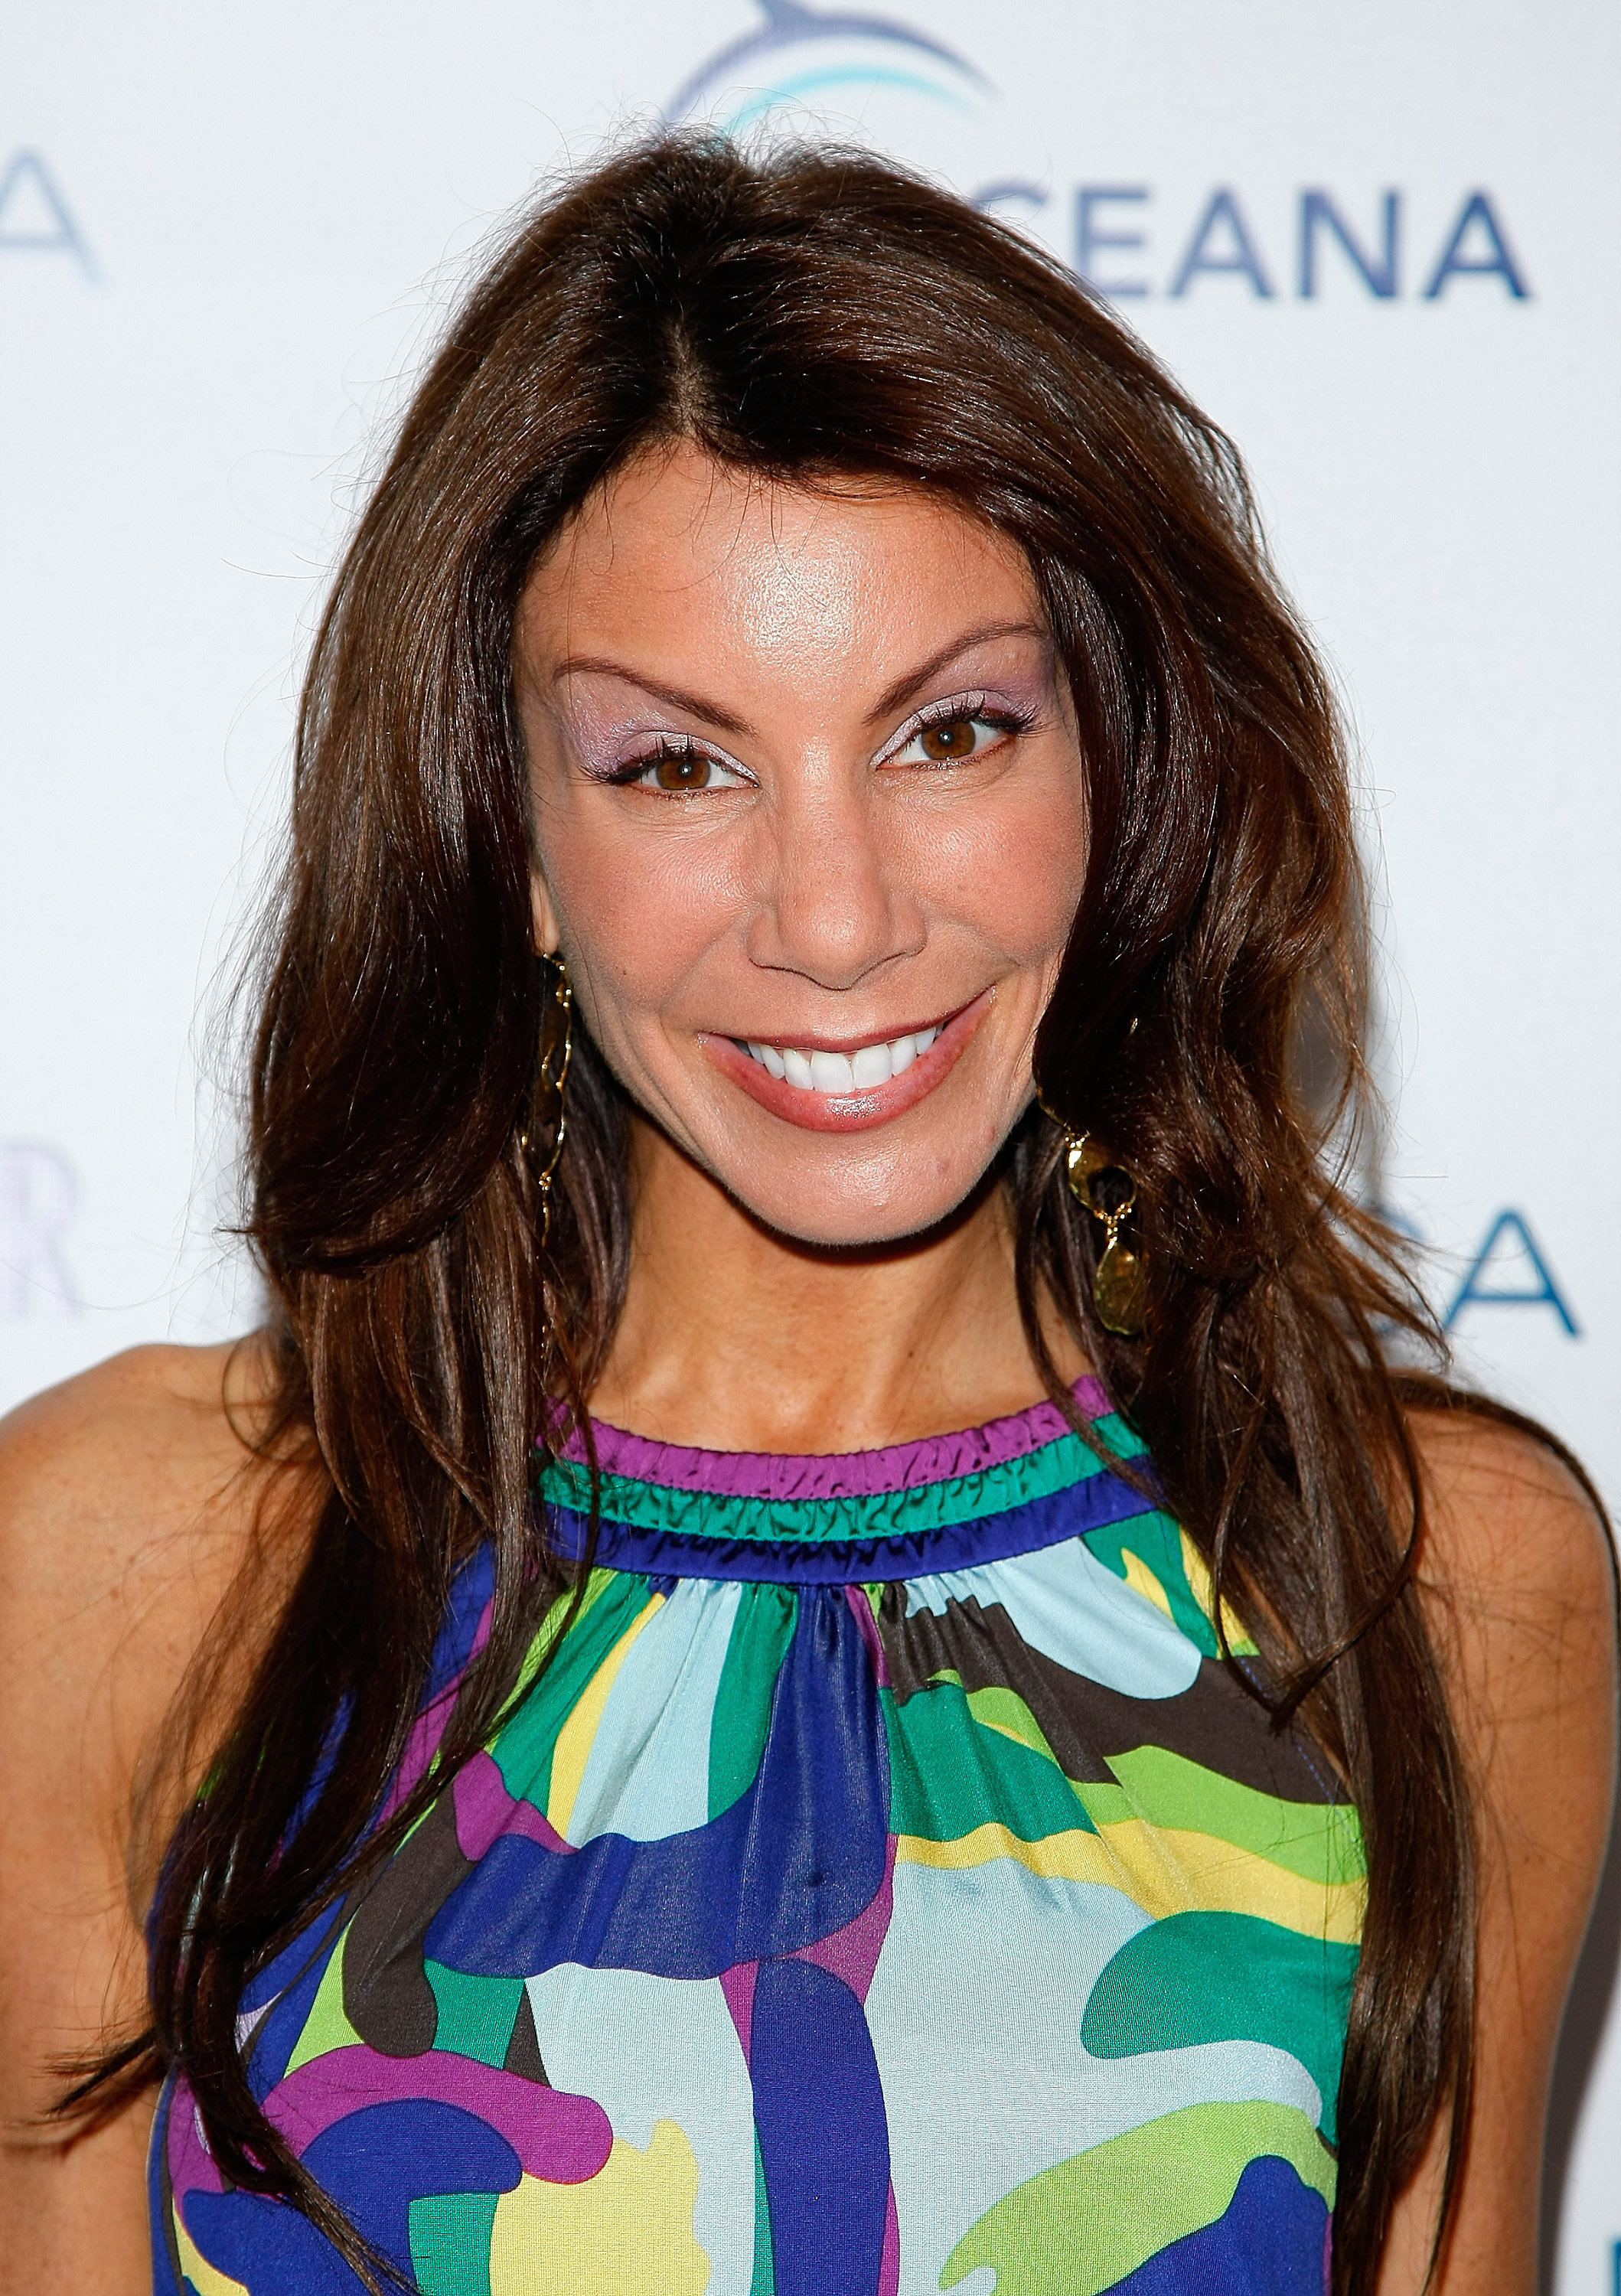 Danielle Staub FIRED From 'Real Housewives Of New Jersey' HuffPost